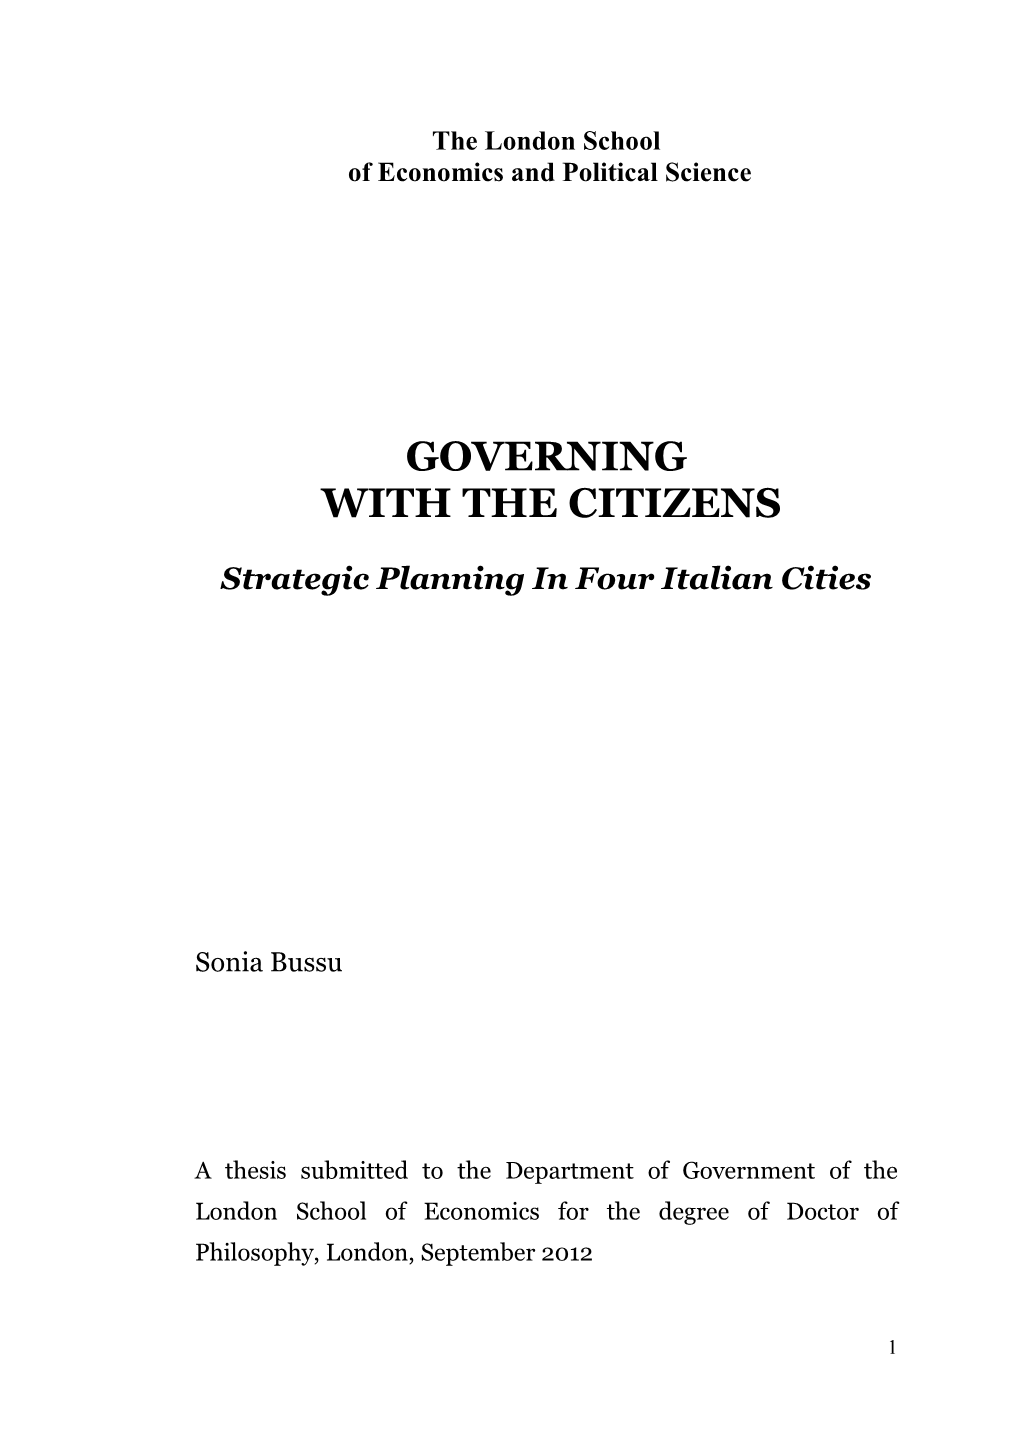 Sonia Bussu Governing with the Citizens Phd Thesis